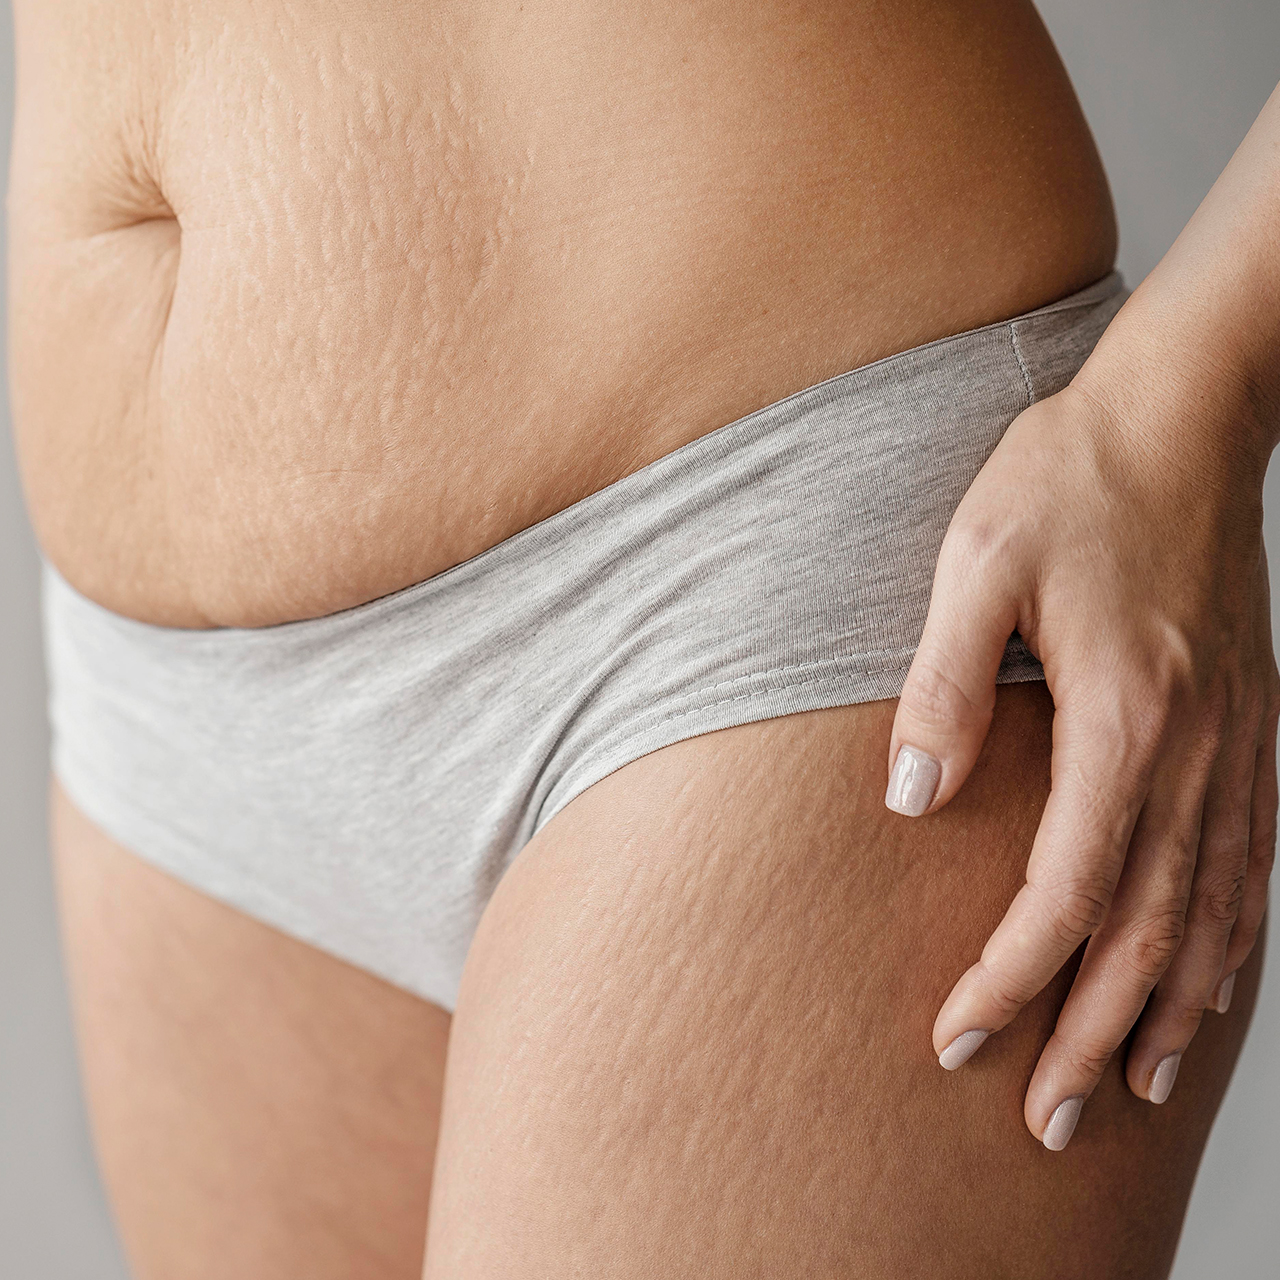 Cellulite and skin laxity